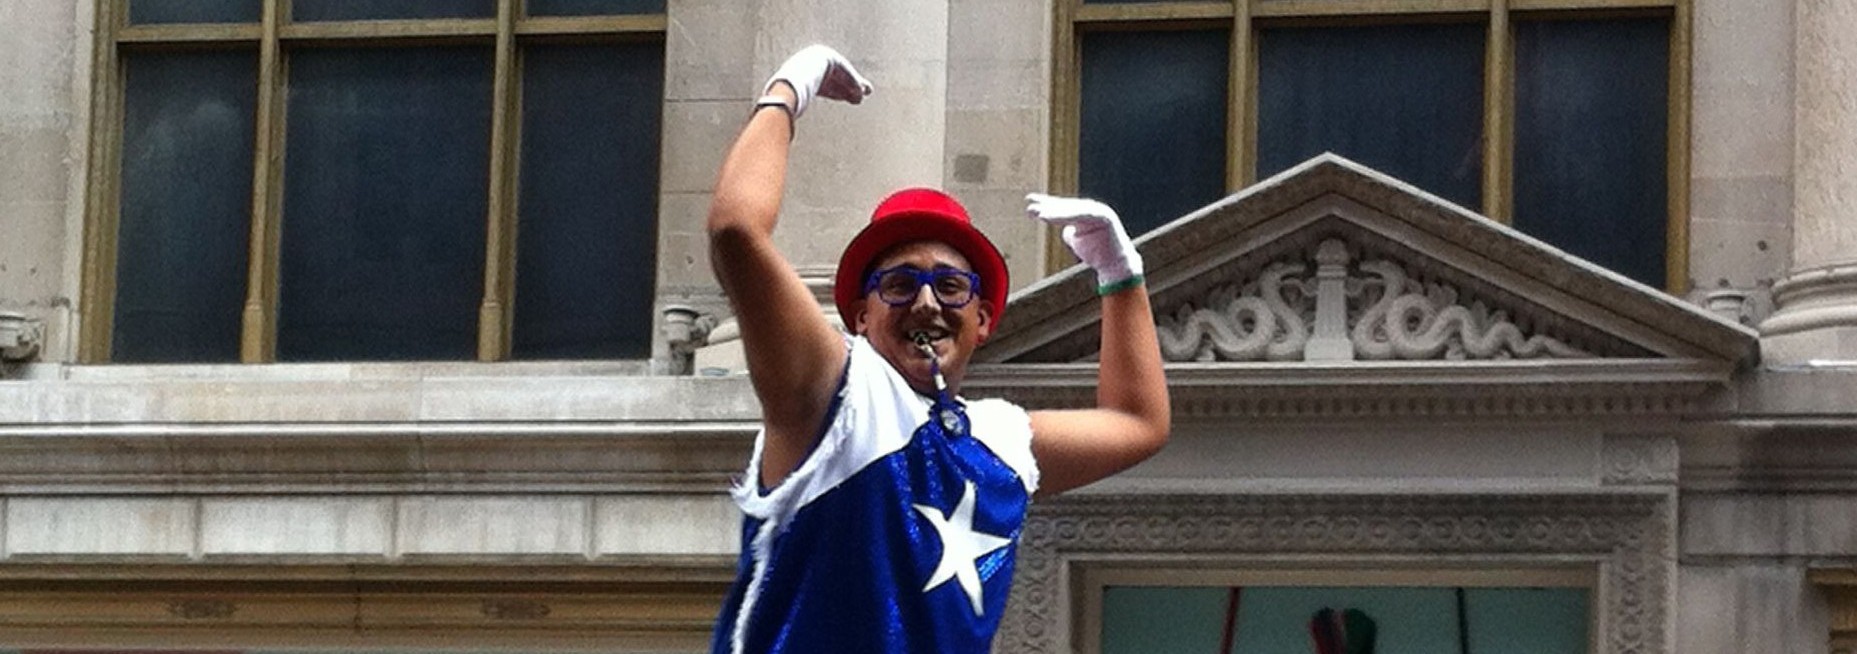 Puerto Rican Day Parade Entertainers